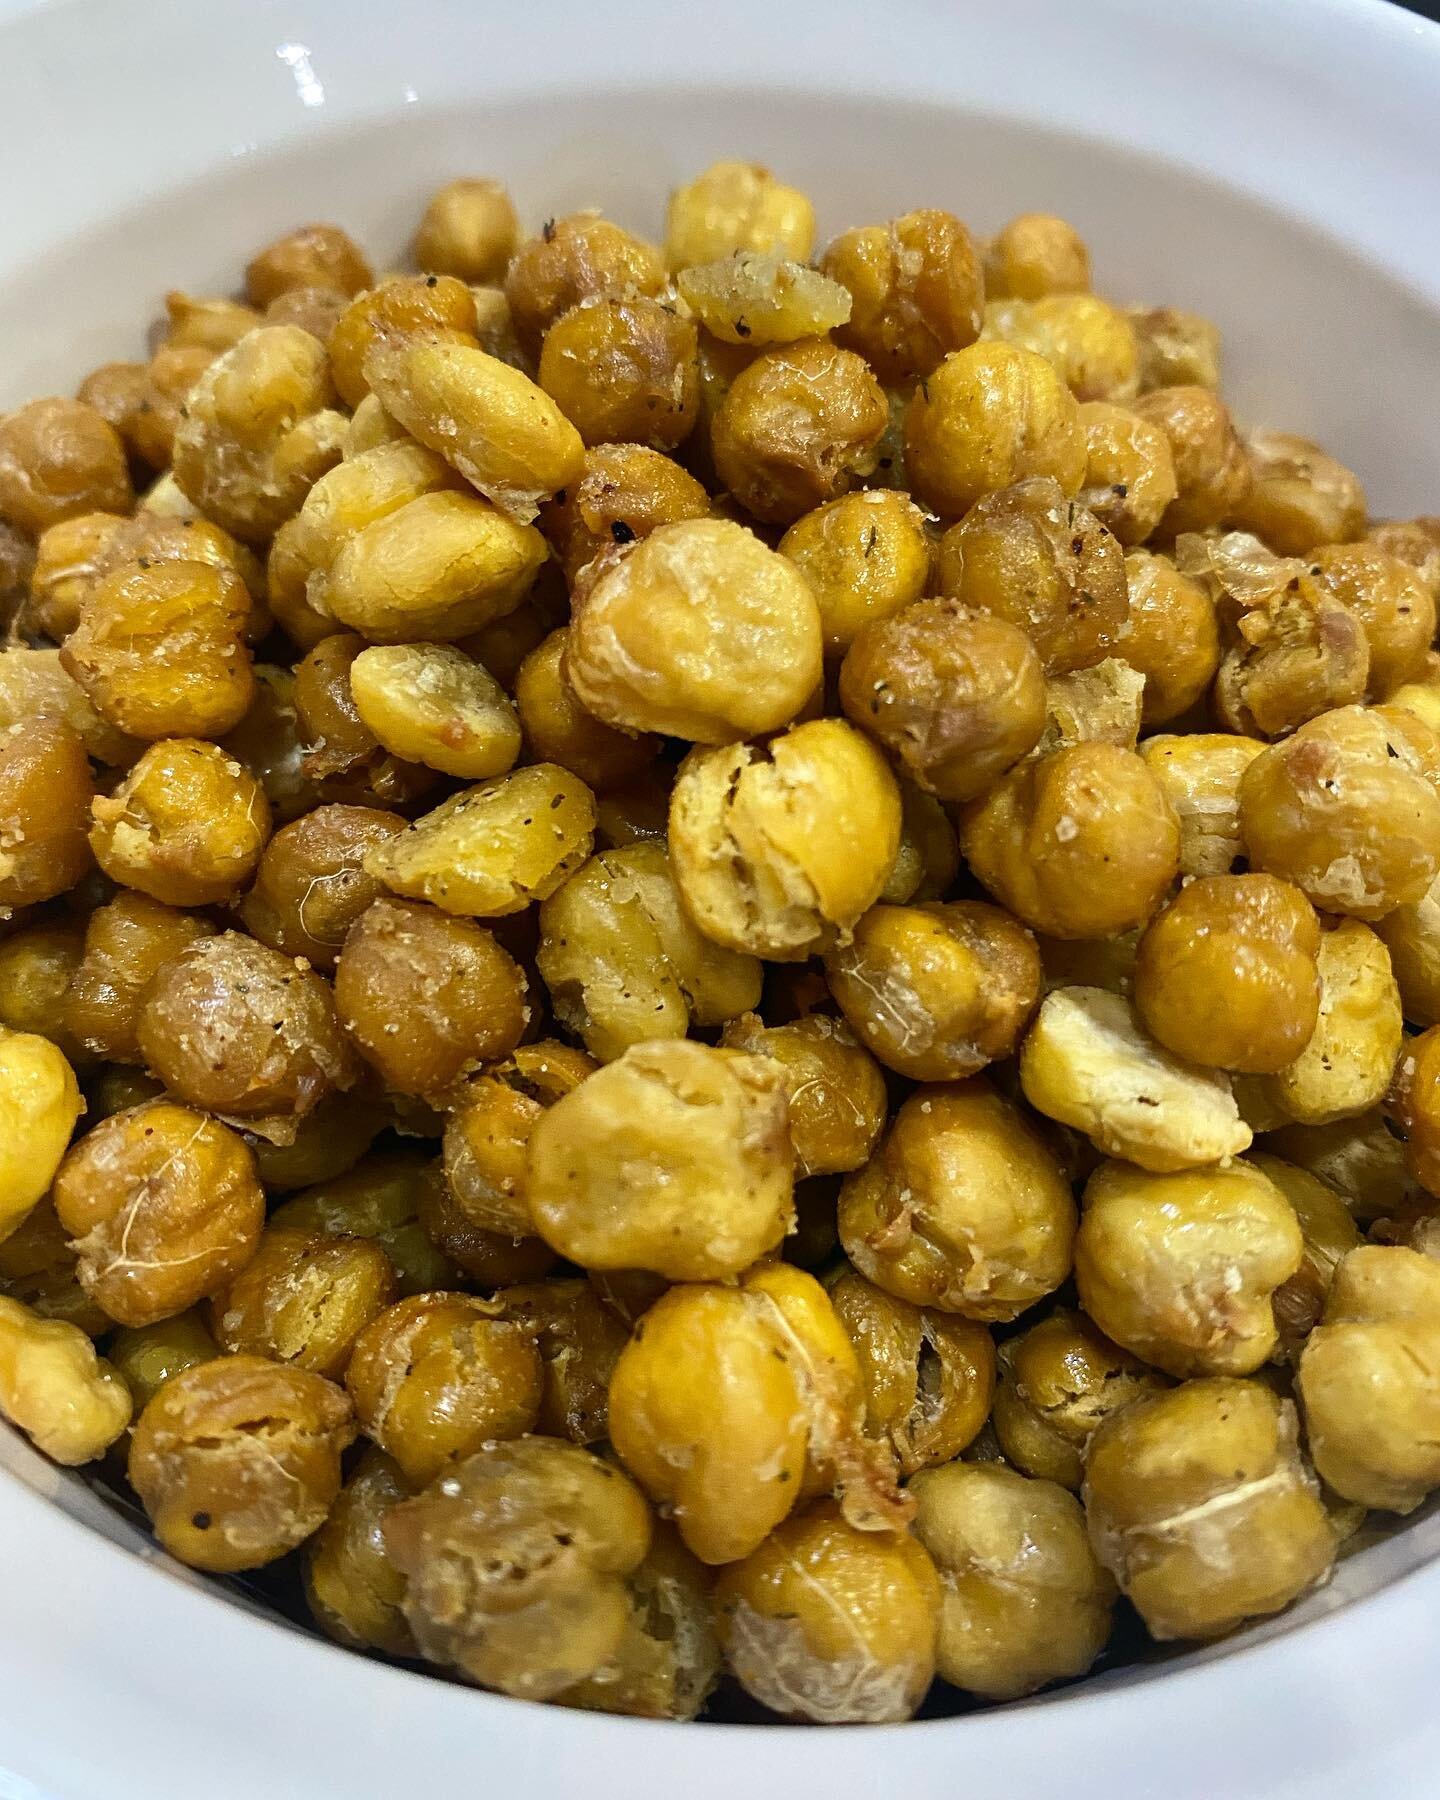 Looking for a new snack idea? 
I gotchu.

#Chickpeas are not only crunchy and nutty but also packed with protein and fiber. (One cup contains 14.5 g of protein &amp; 12 grams of fiber !)

1 can of chickpeas is ~$1.50 (less than most protein bars or d